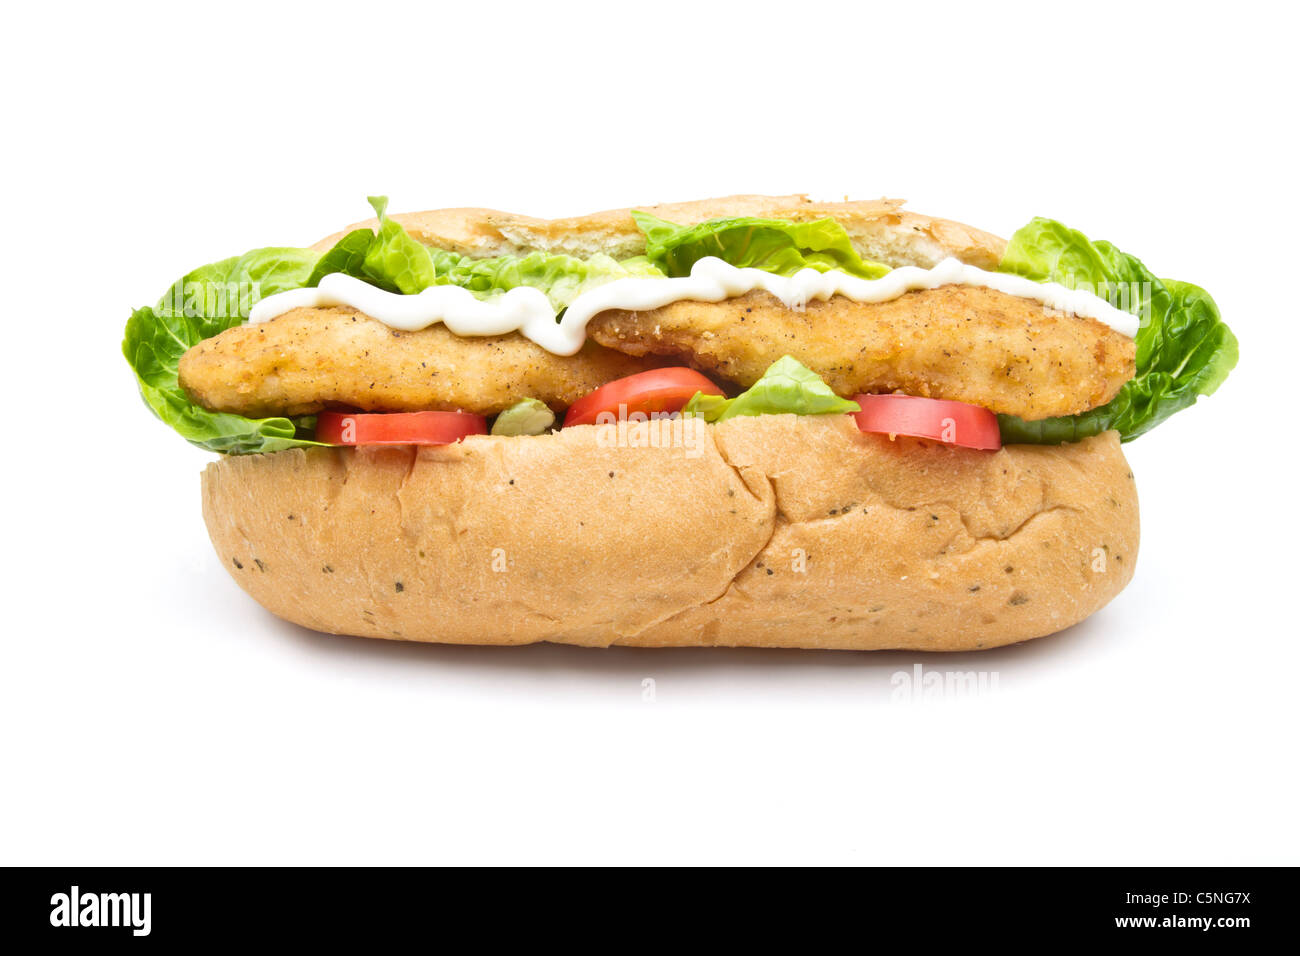 Fried Chicken Sub sandwich from low perspective isolated on white. Stock Photo